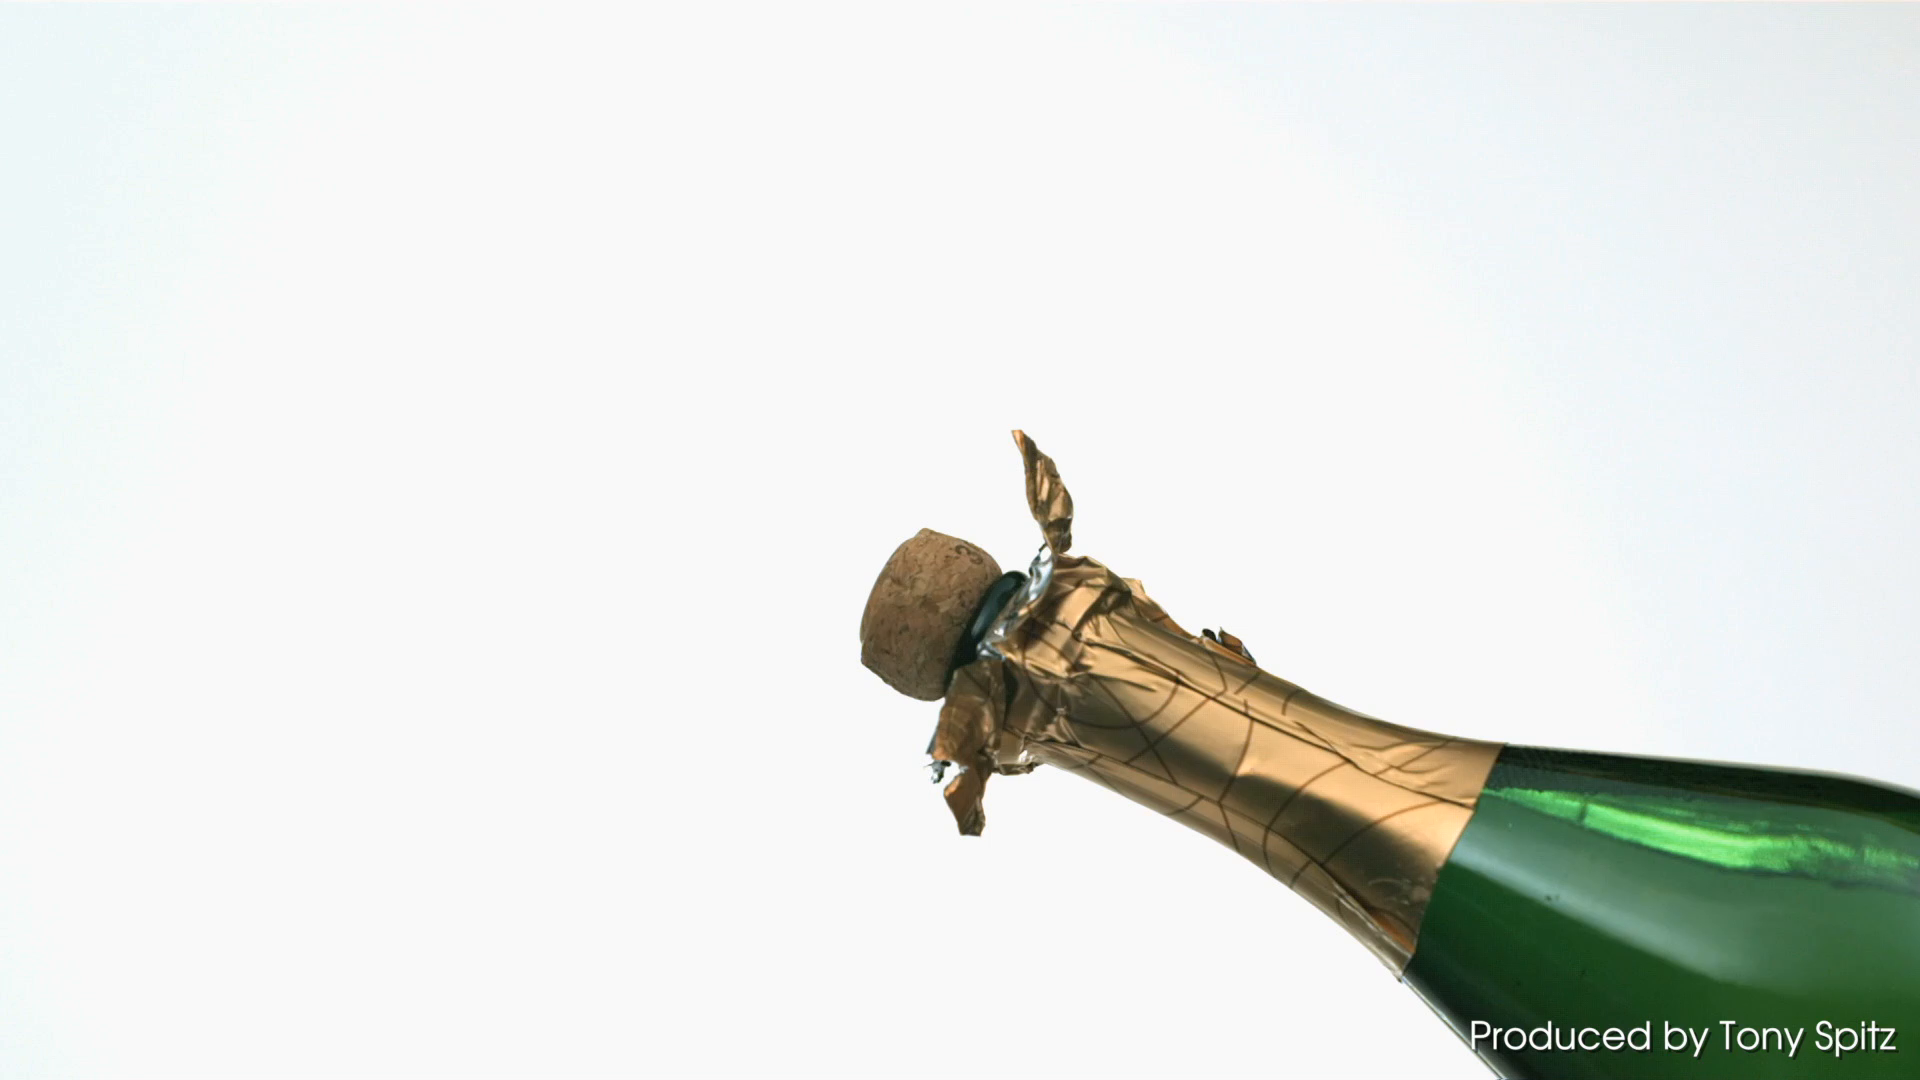 Pop! The sound of your champagne may reveal its quality